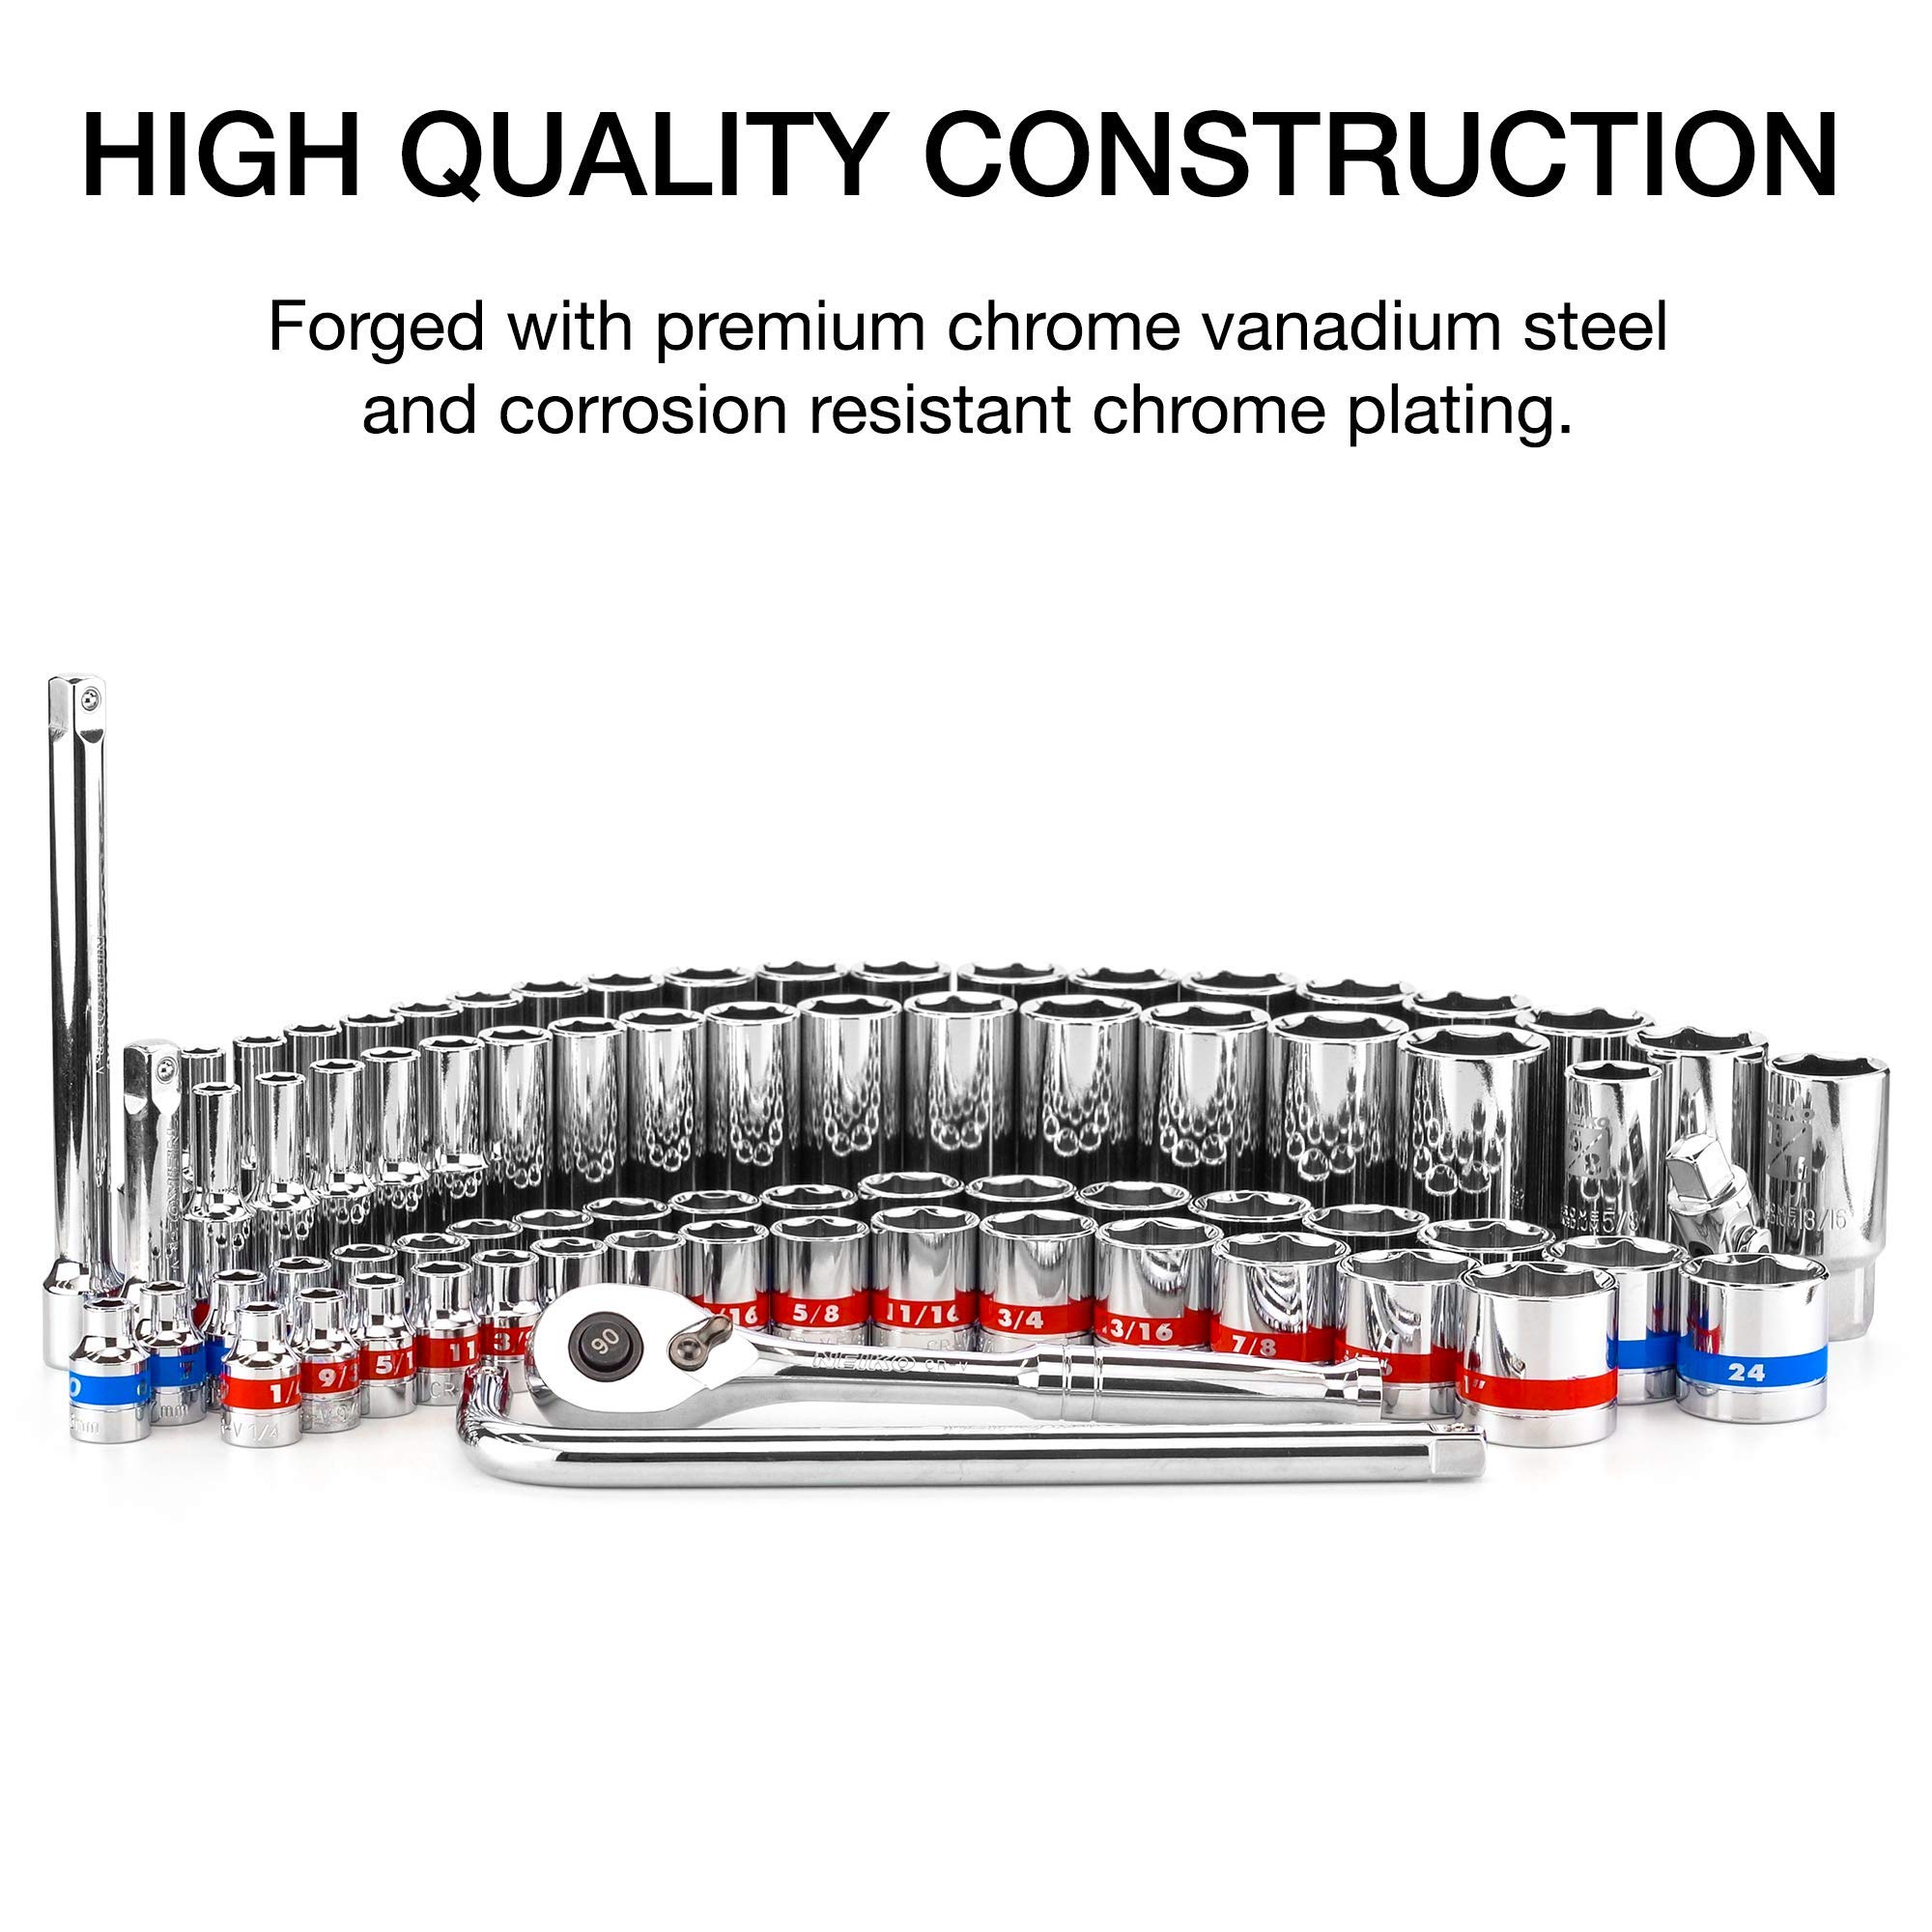 Neiko 02472A 3/8-Inch-Drive Colored Mechanics Tool Ratchet, Socket Set, 76-Piece Standard and Deep SAE Sizes 1/4" to 1" Metric Sizes 6 mm to 24 mm Made with CrV Steel for Auto Repair